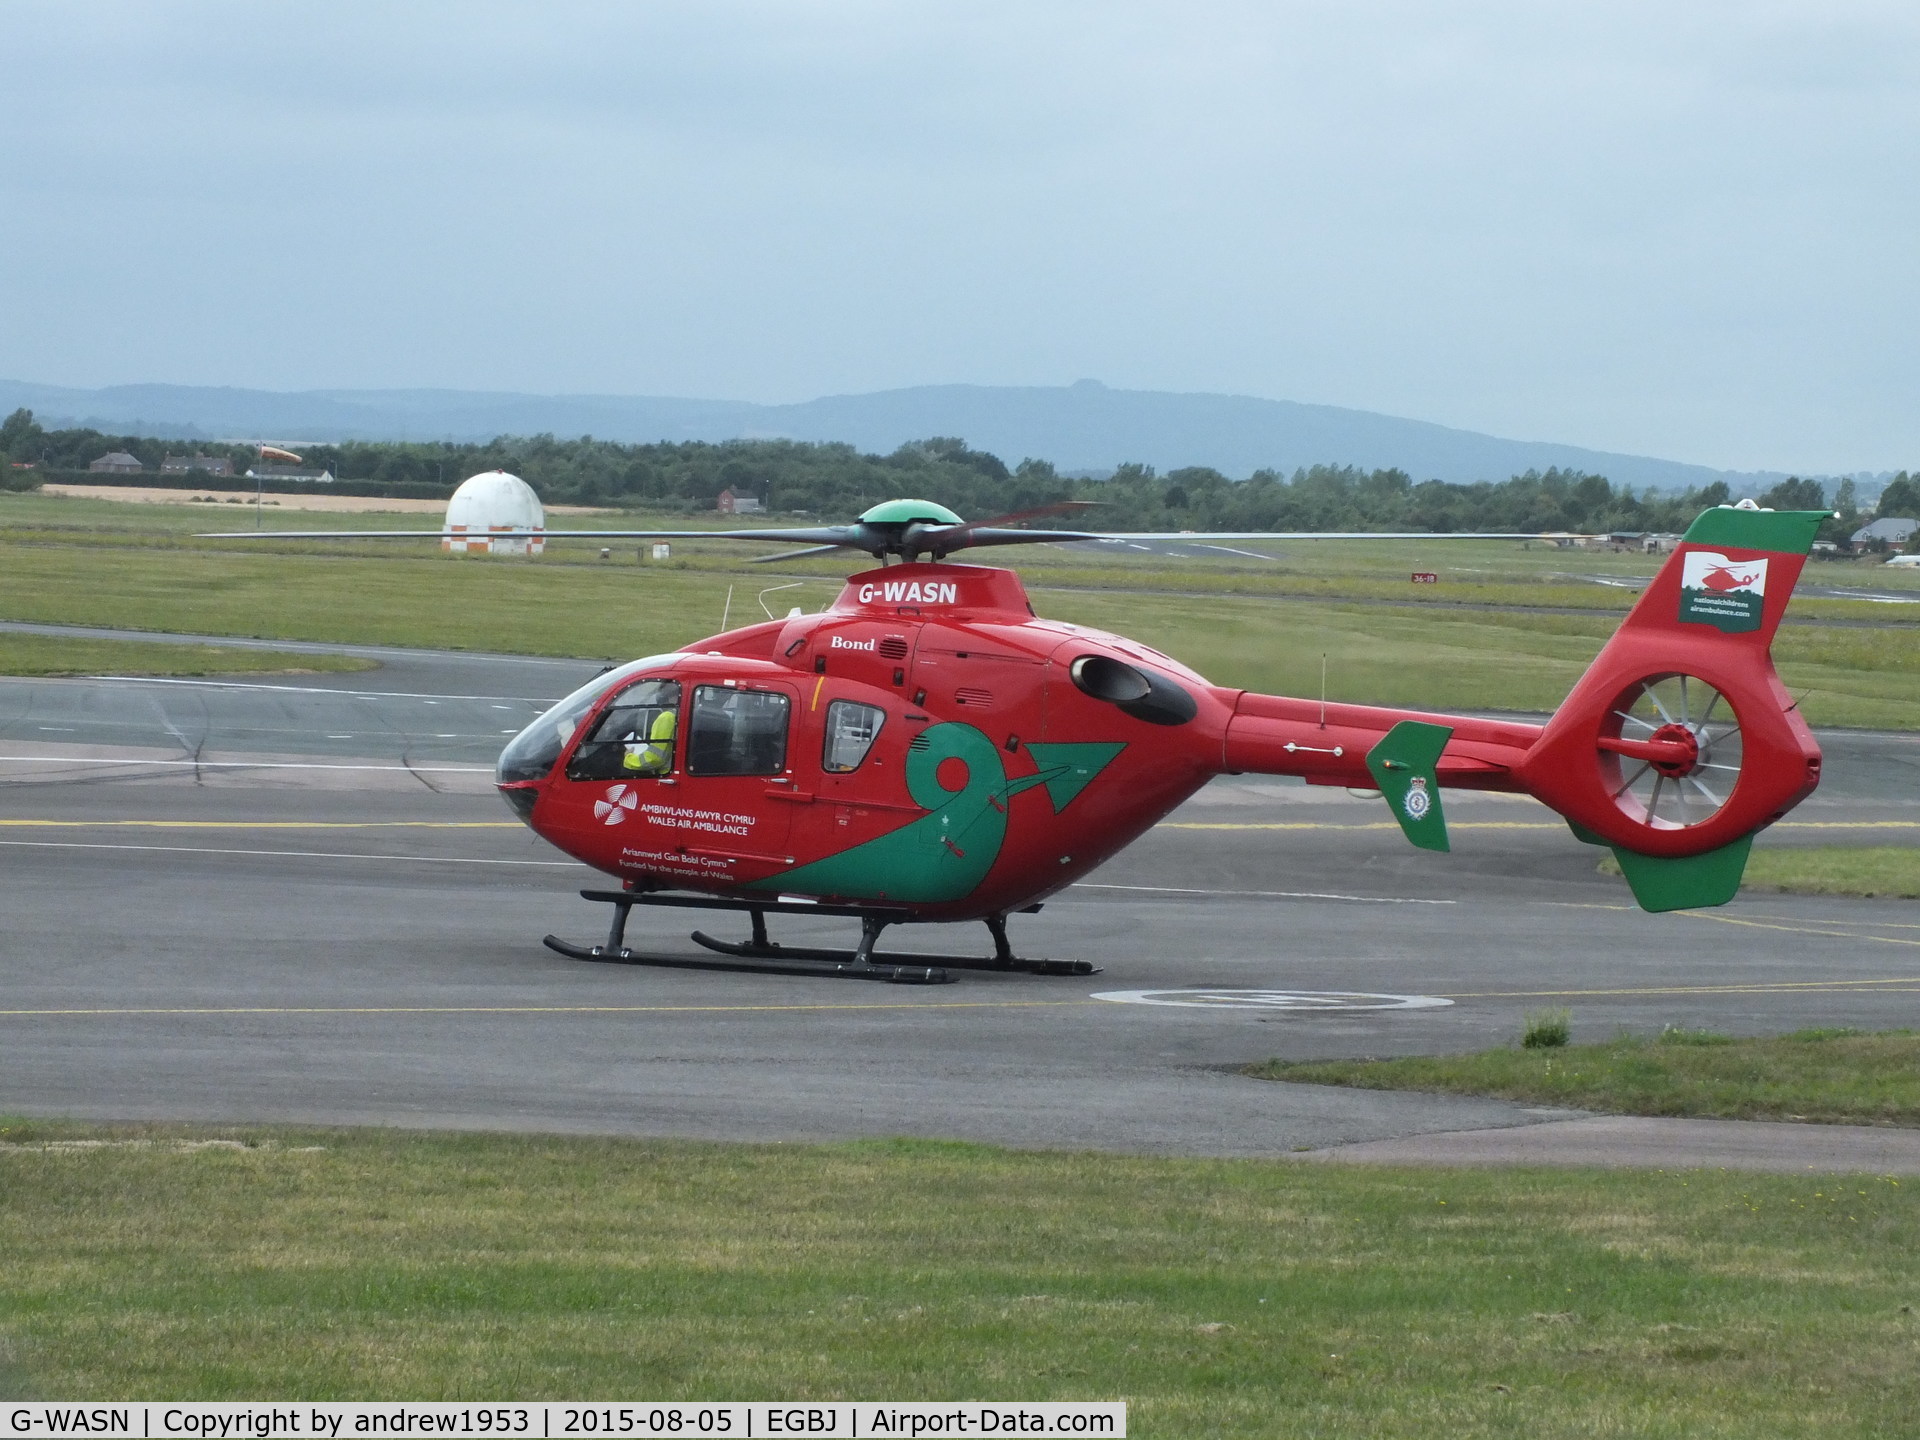 G-WASN, 2008 Eurocopter EC-135T-2+ C/N 0746, G-WASN at Gloucestershire Airport.